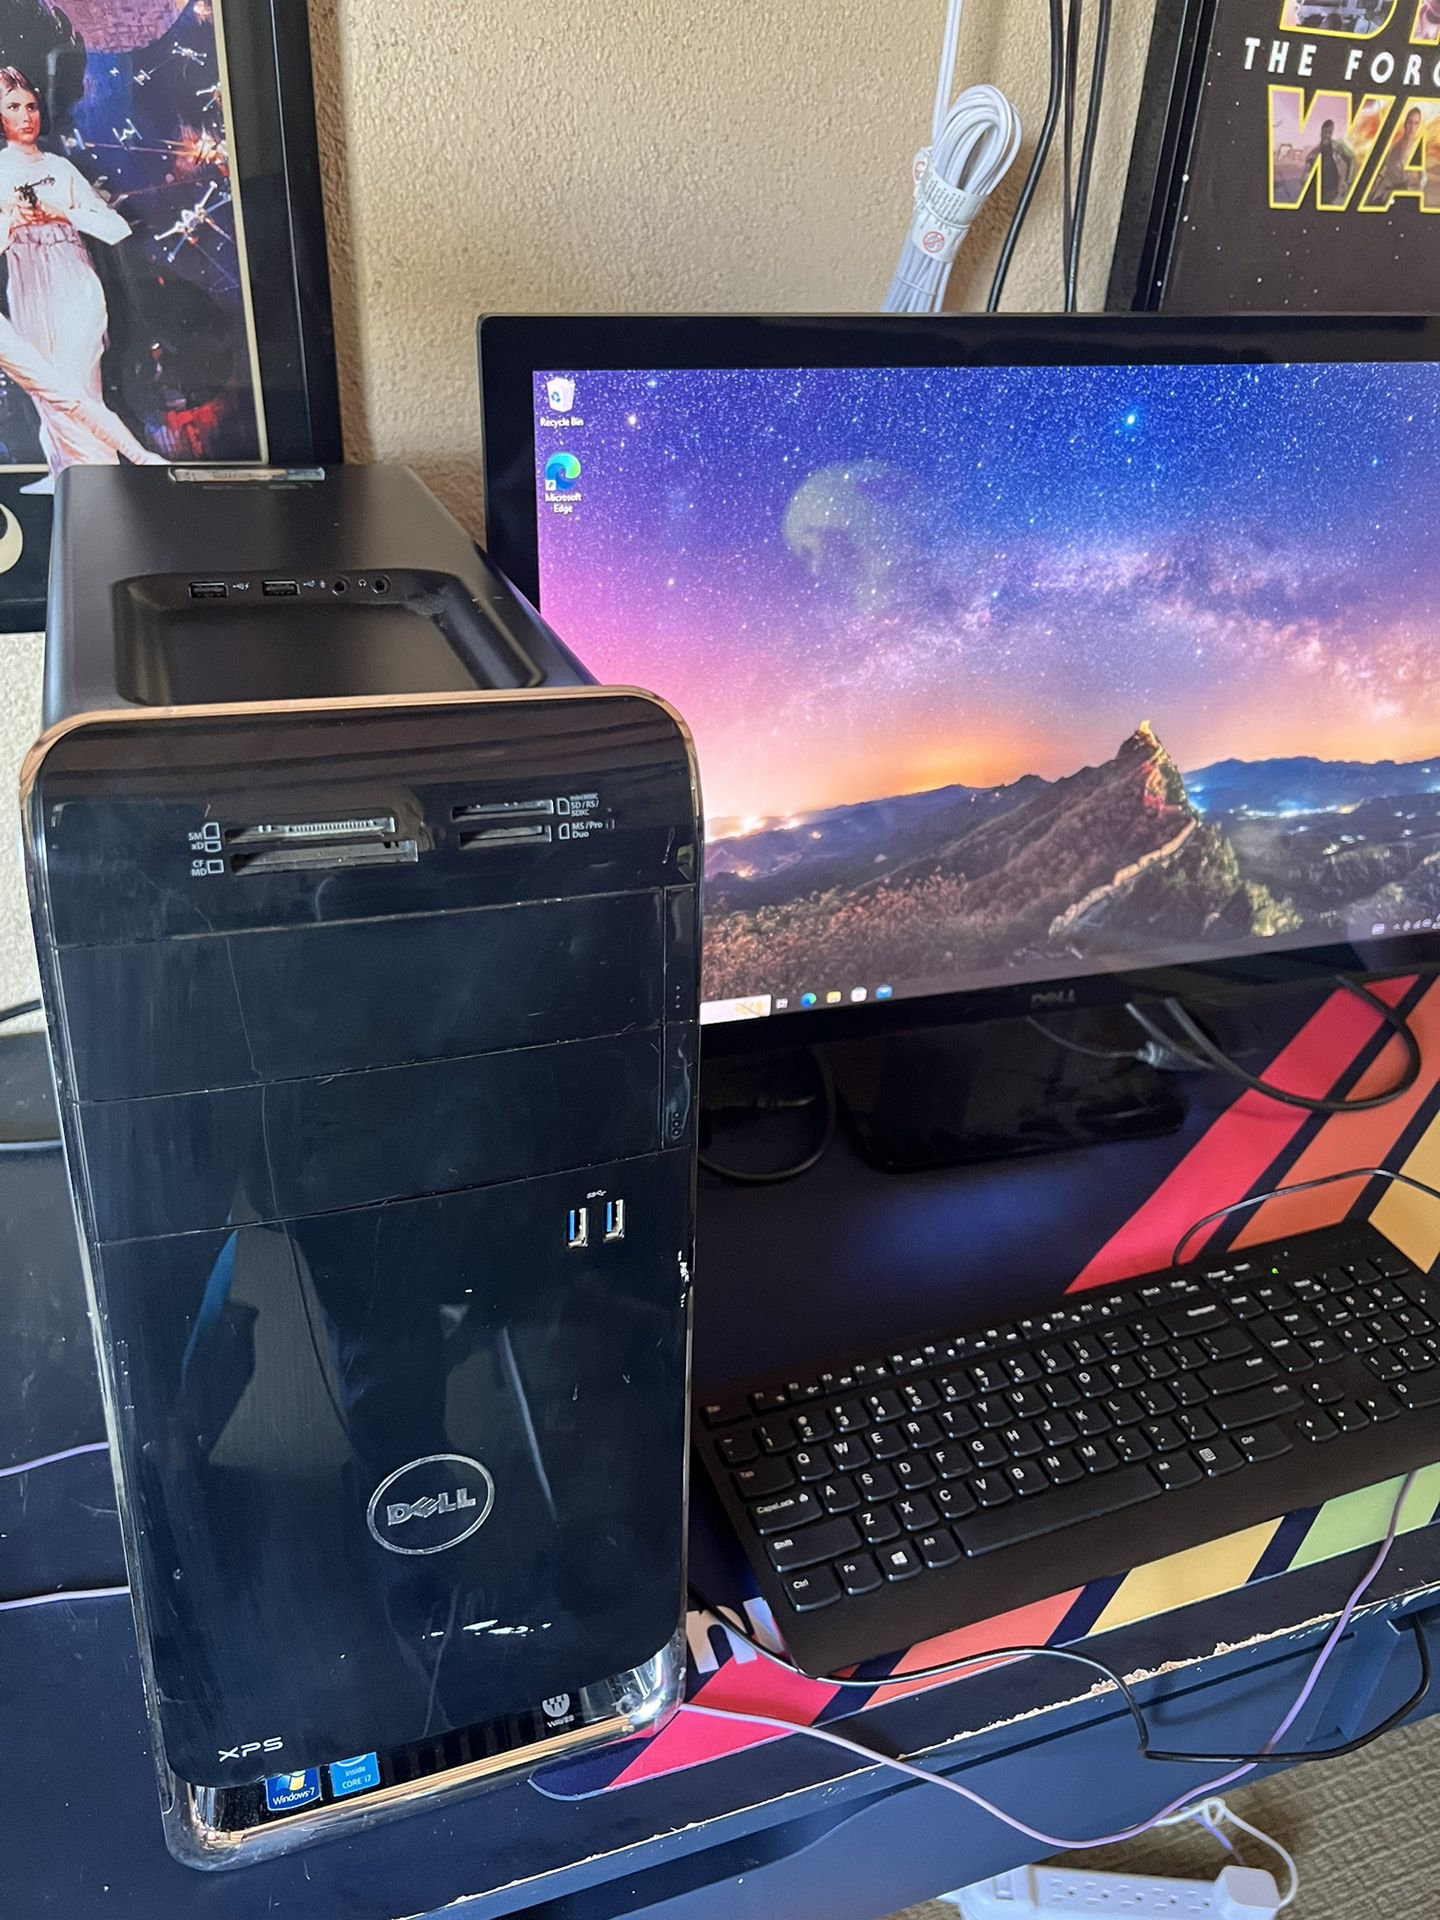 Dell Xps Tower And Monitor